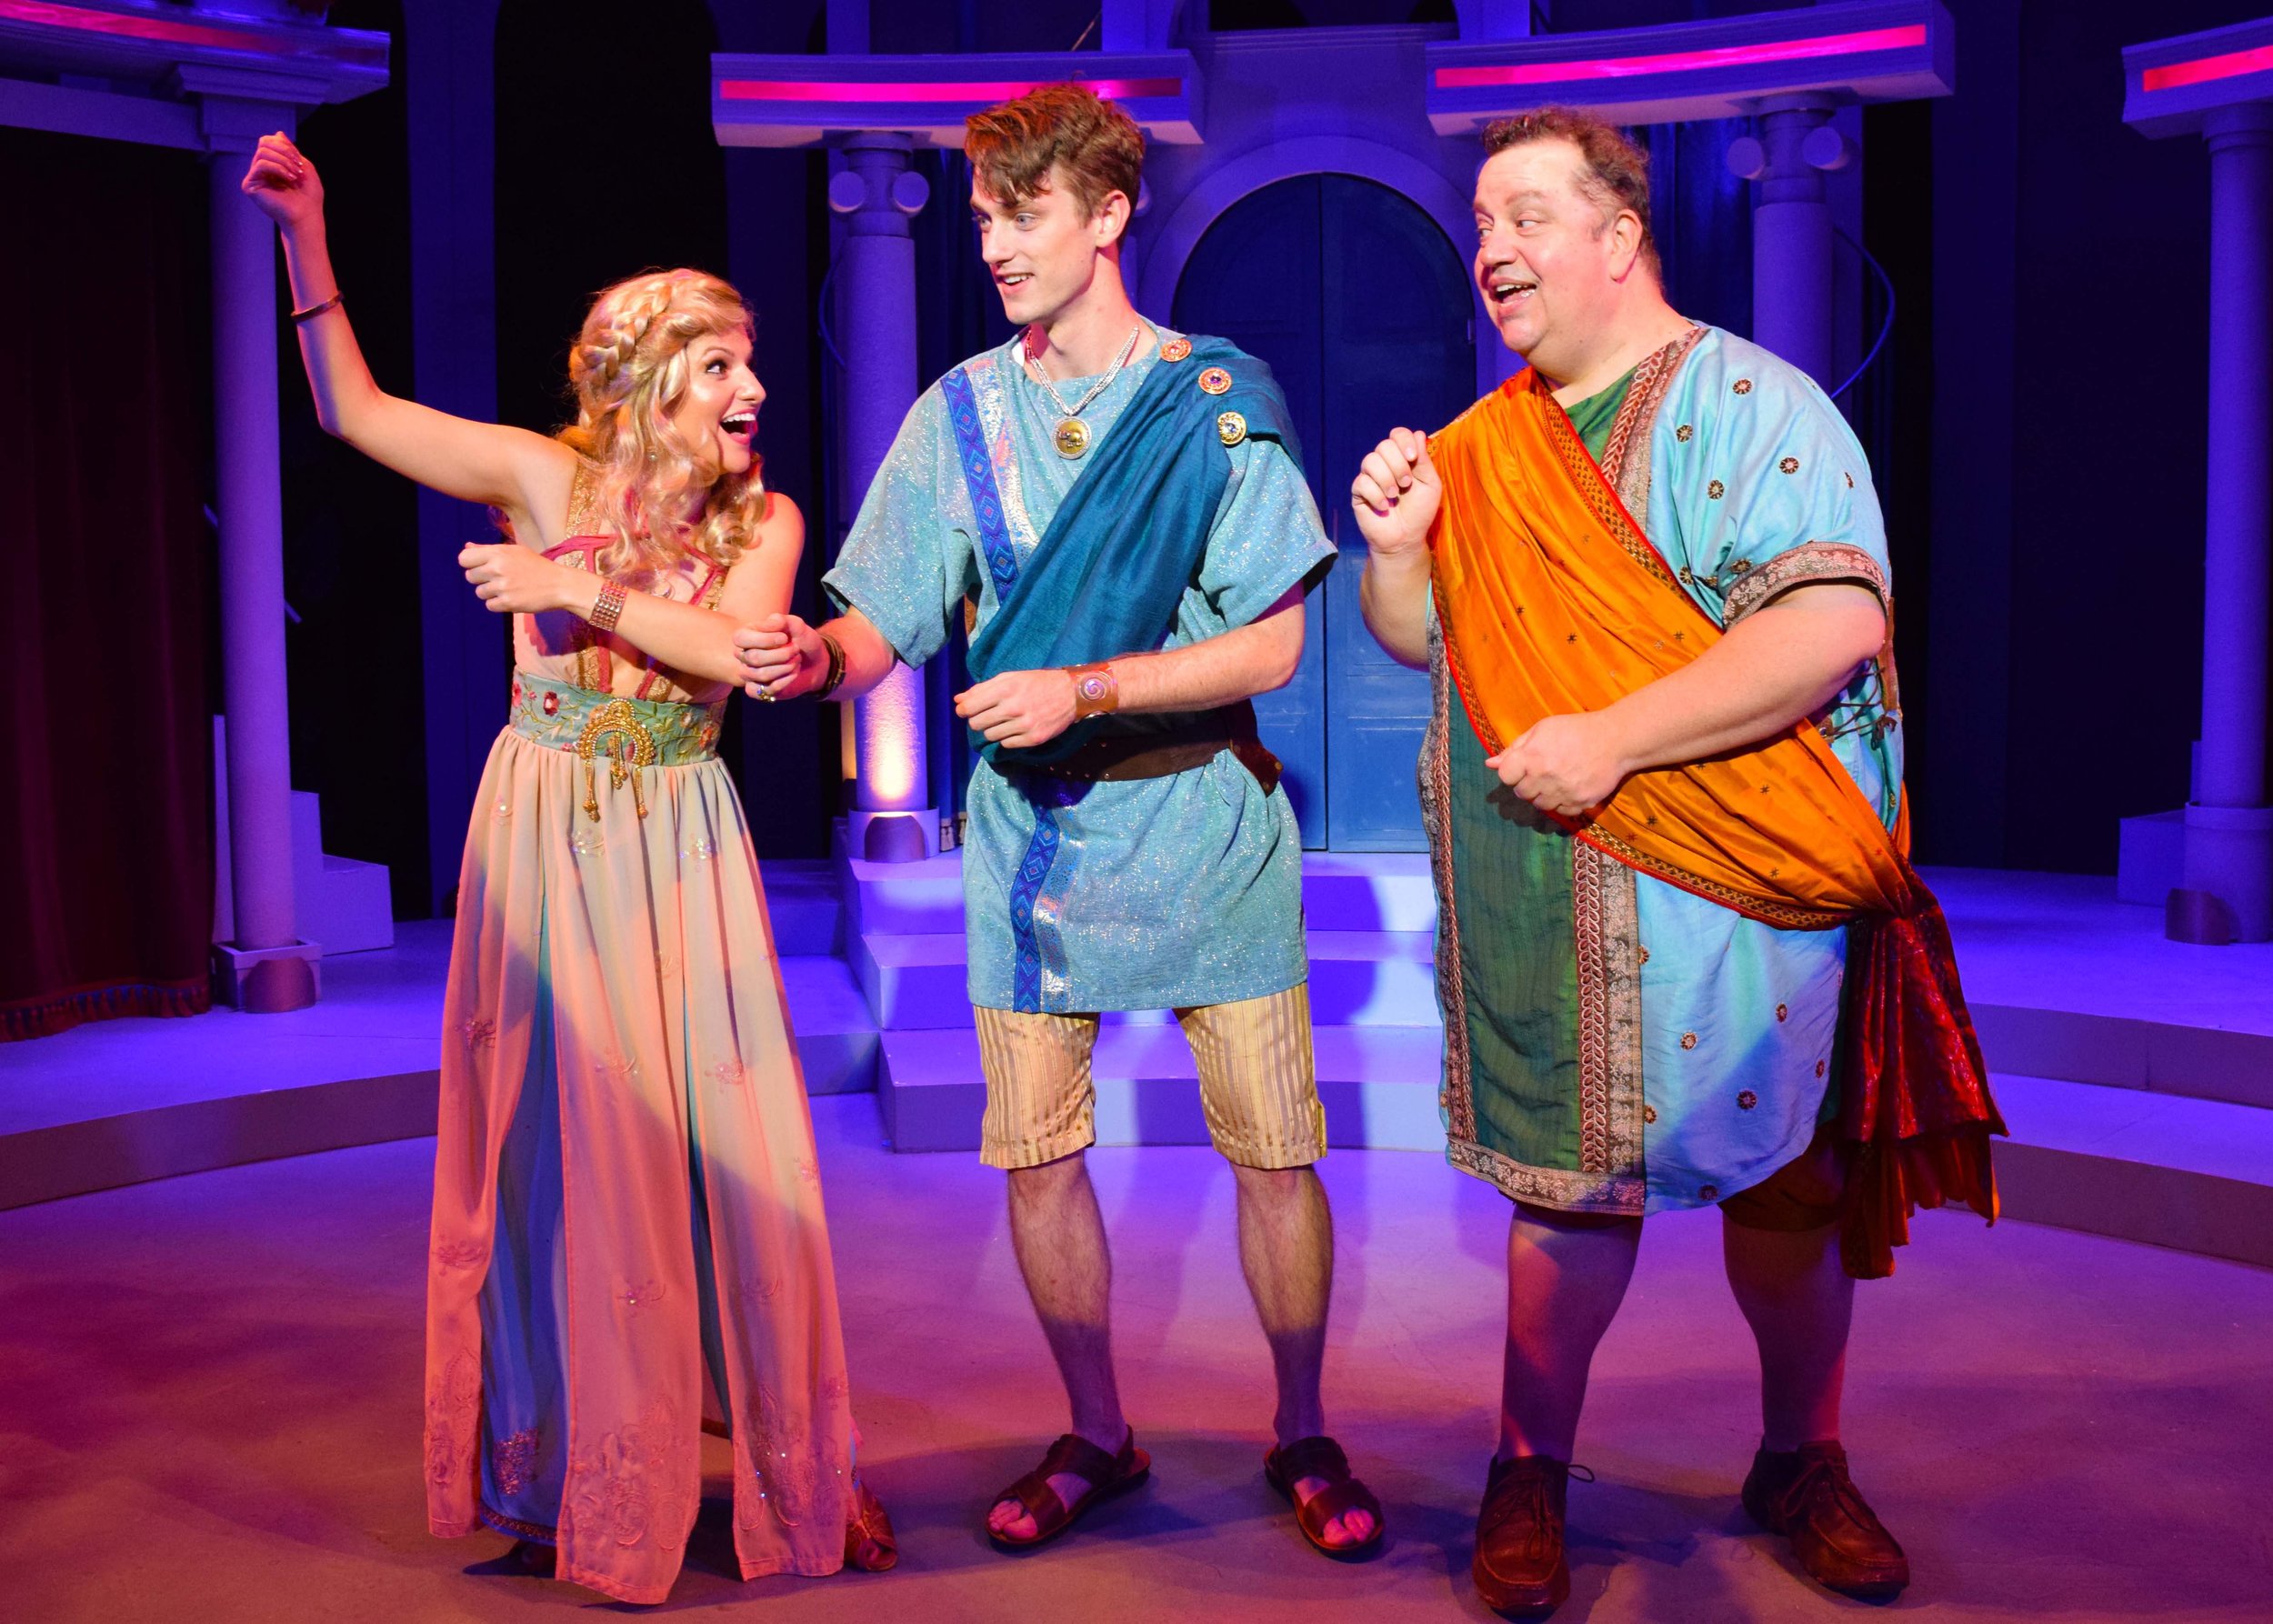  Philia (Nicole Kaplan), Hero (Michael Thomas Grant), Pseudolus (Paul C. Vogt) in A Funny Thing Happened On The Way To The Forum at the Garry Marshall Theatre. Photo by Chelsea Sutton.   